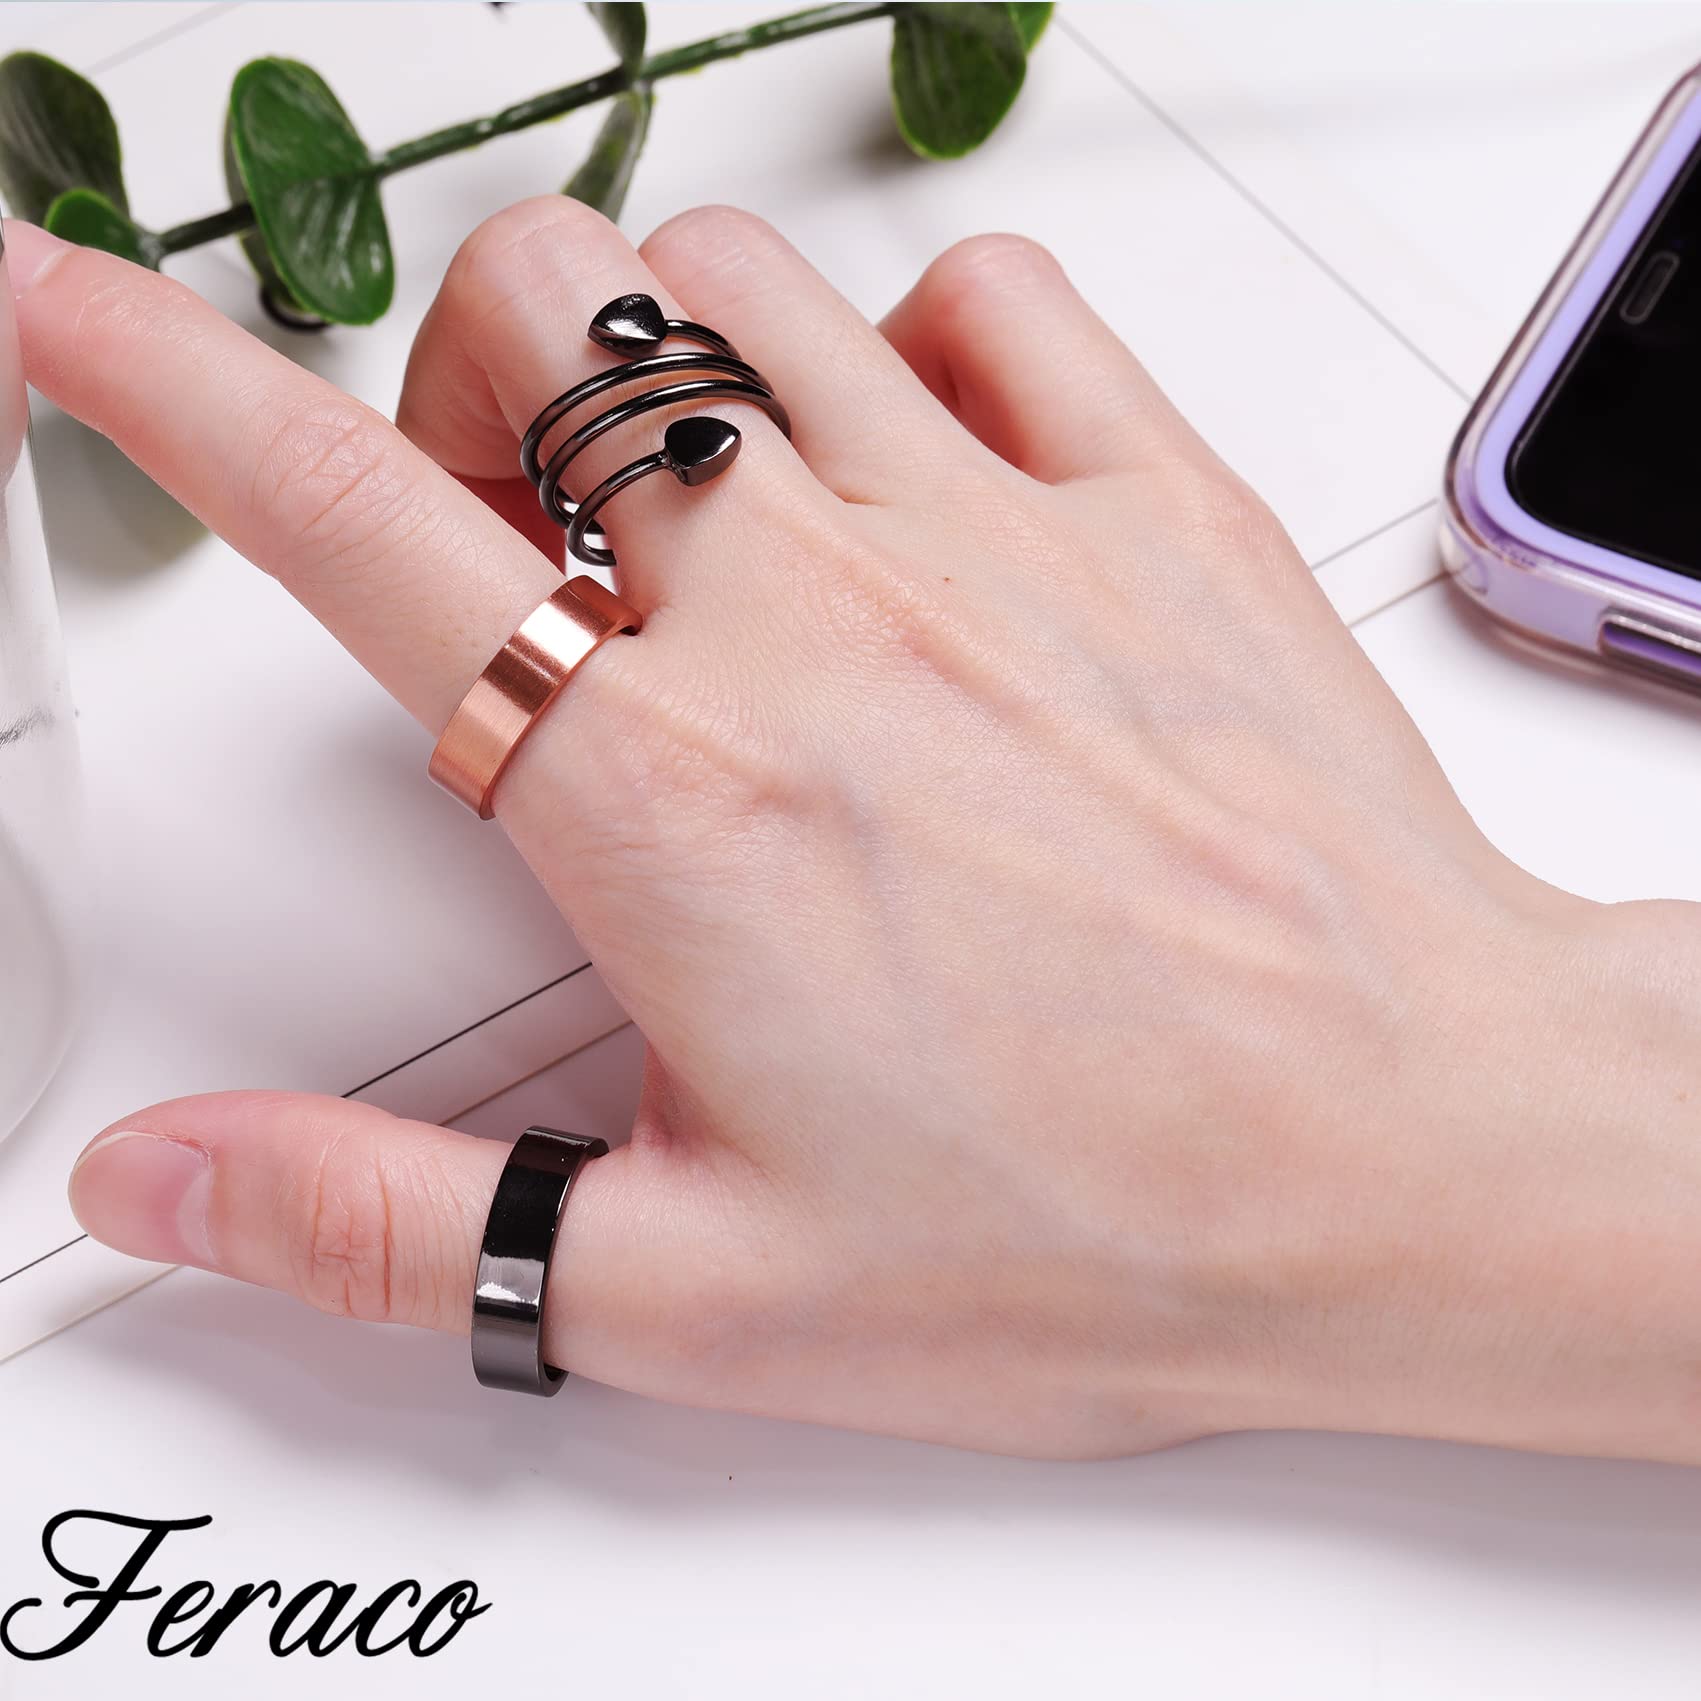 Feraco 2023 New 2 Pcs Magnetic Copper Rings for Women,99.99% Pure Copper Thumb Ring for Women for Valentine's Day,Adjustable Fingers Ring with Gift Box(Silver)